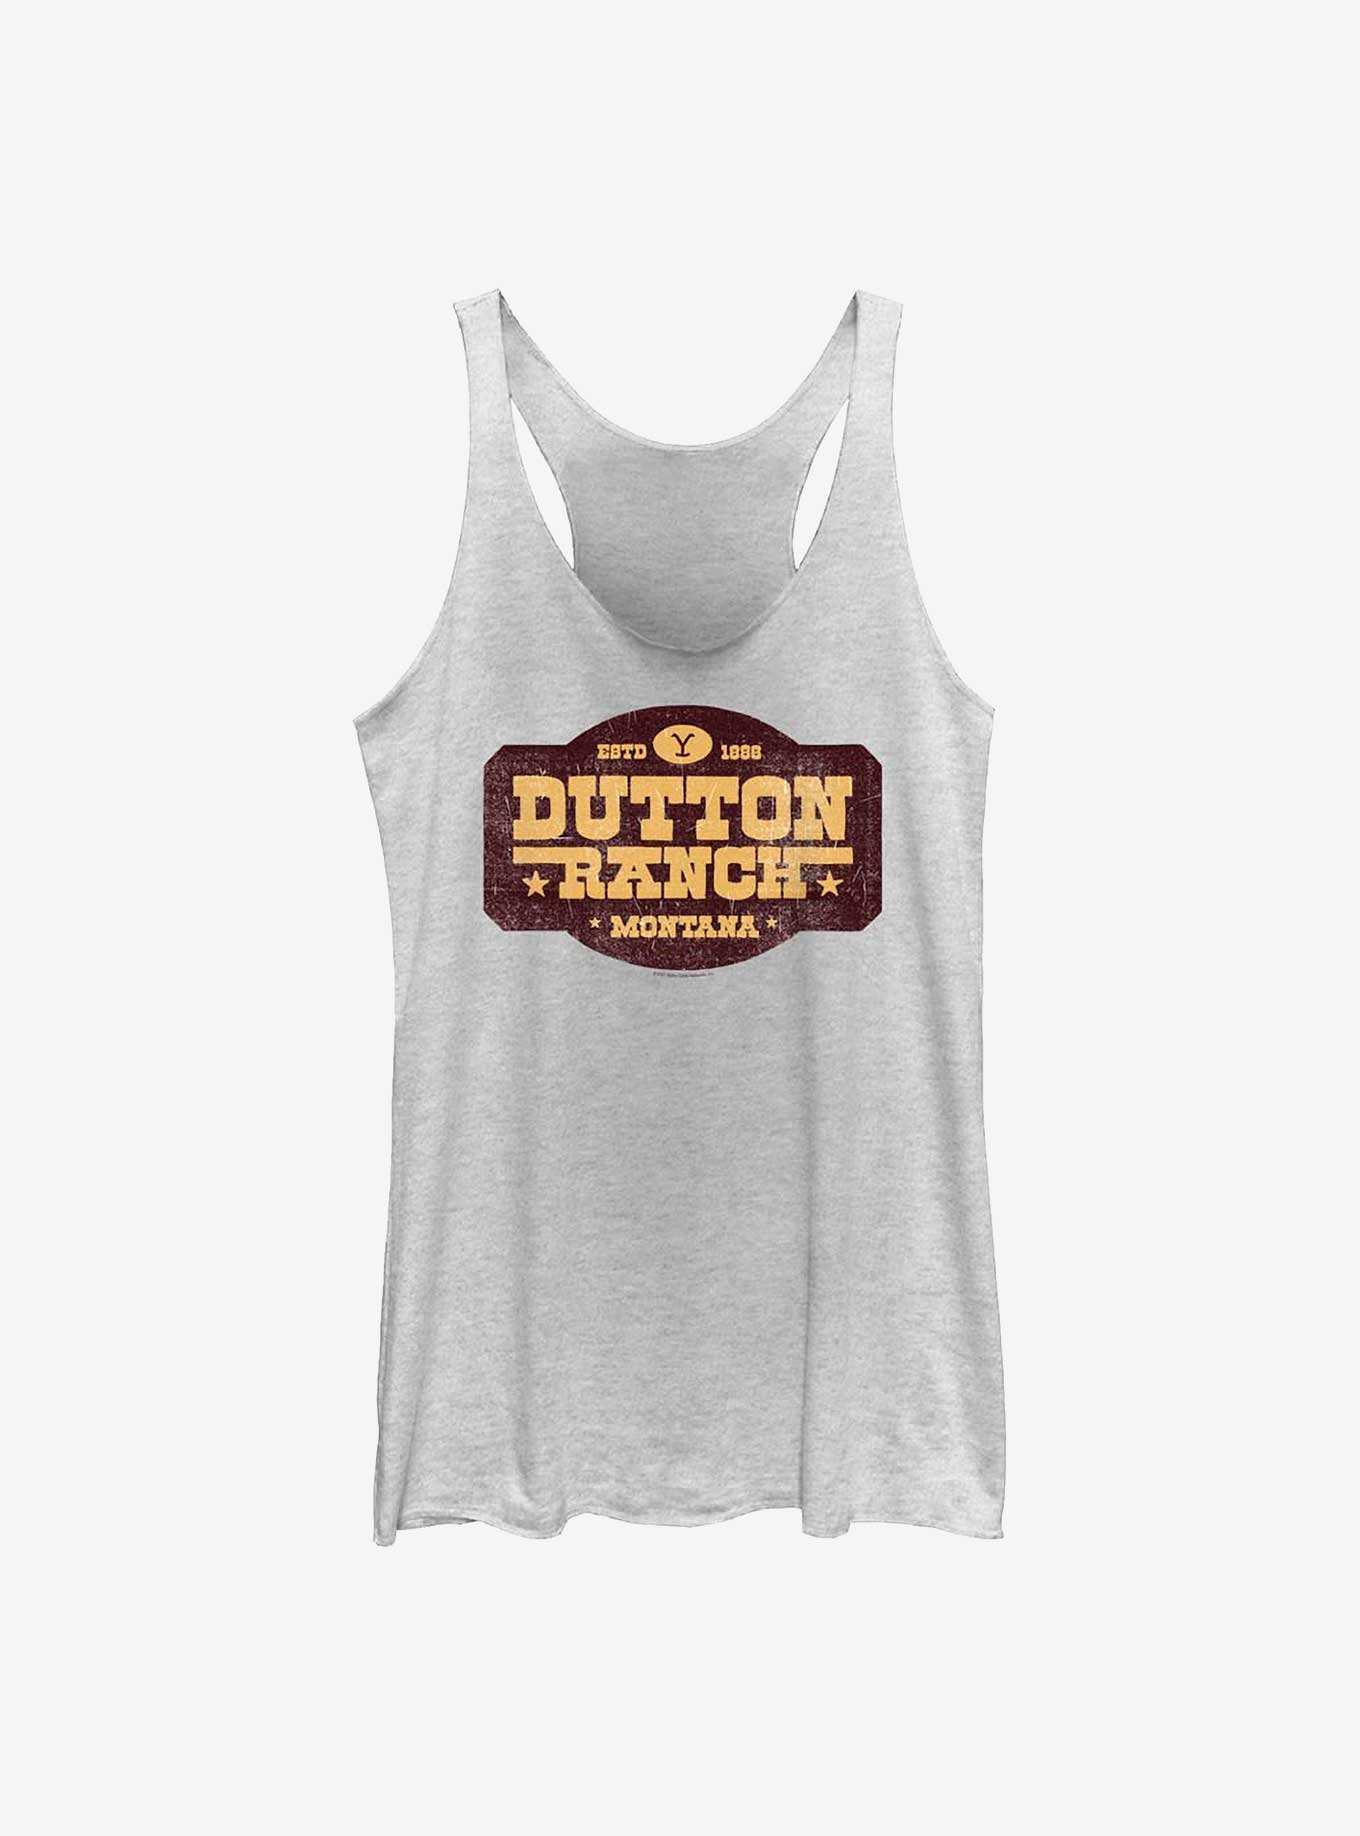 Yellowstone Dutton Ranch Distressed Sign Girls Tank, , hi-res